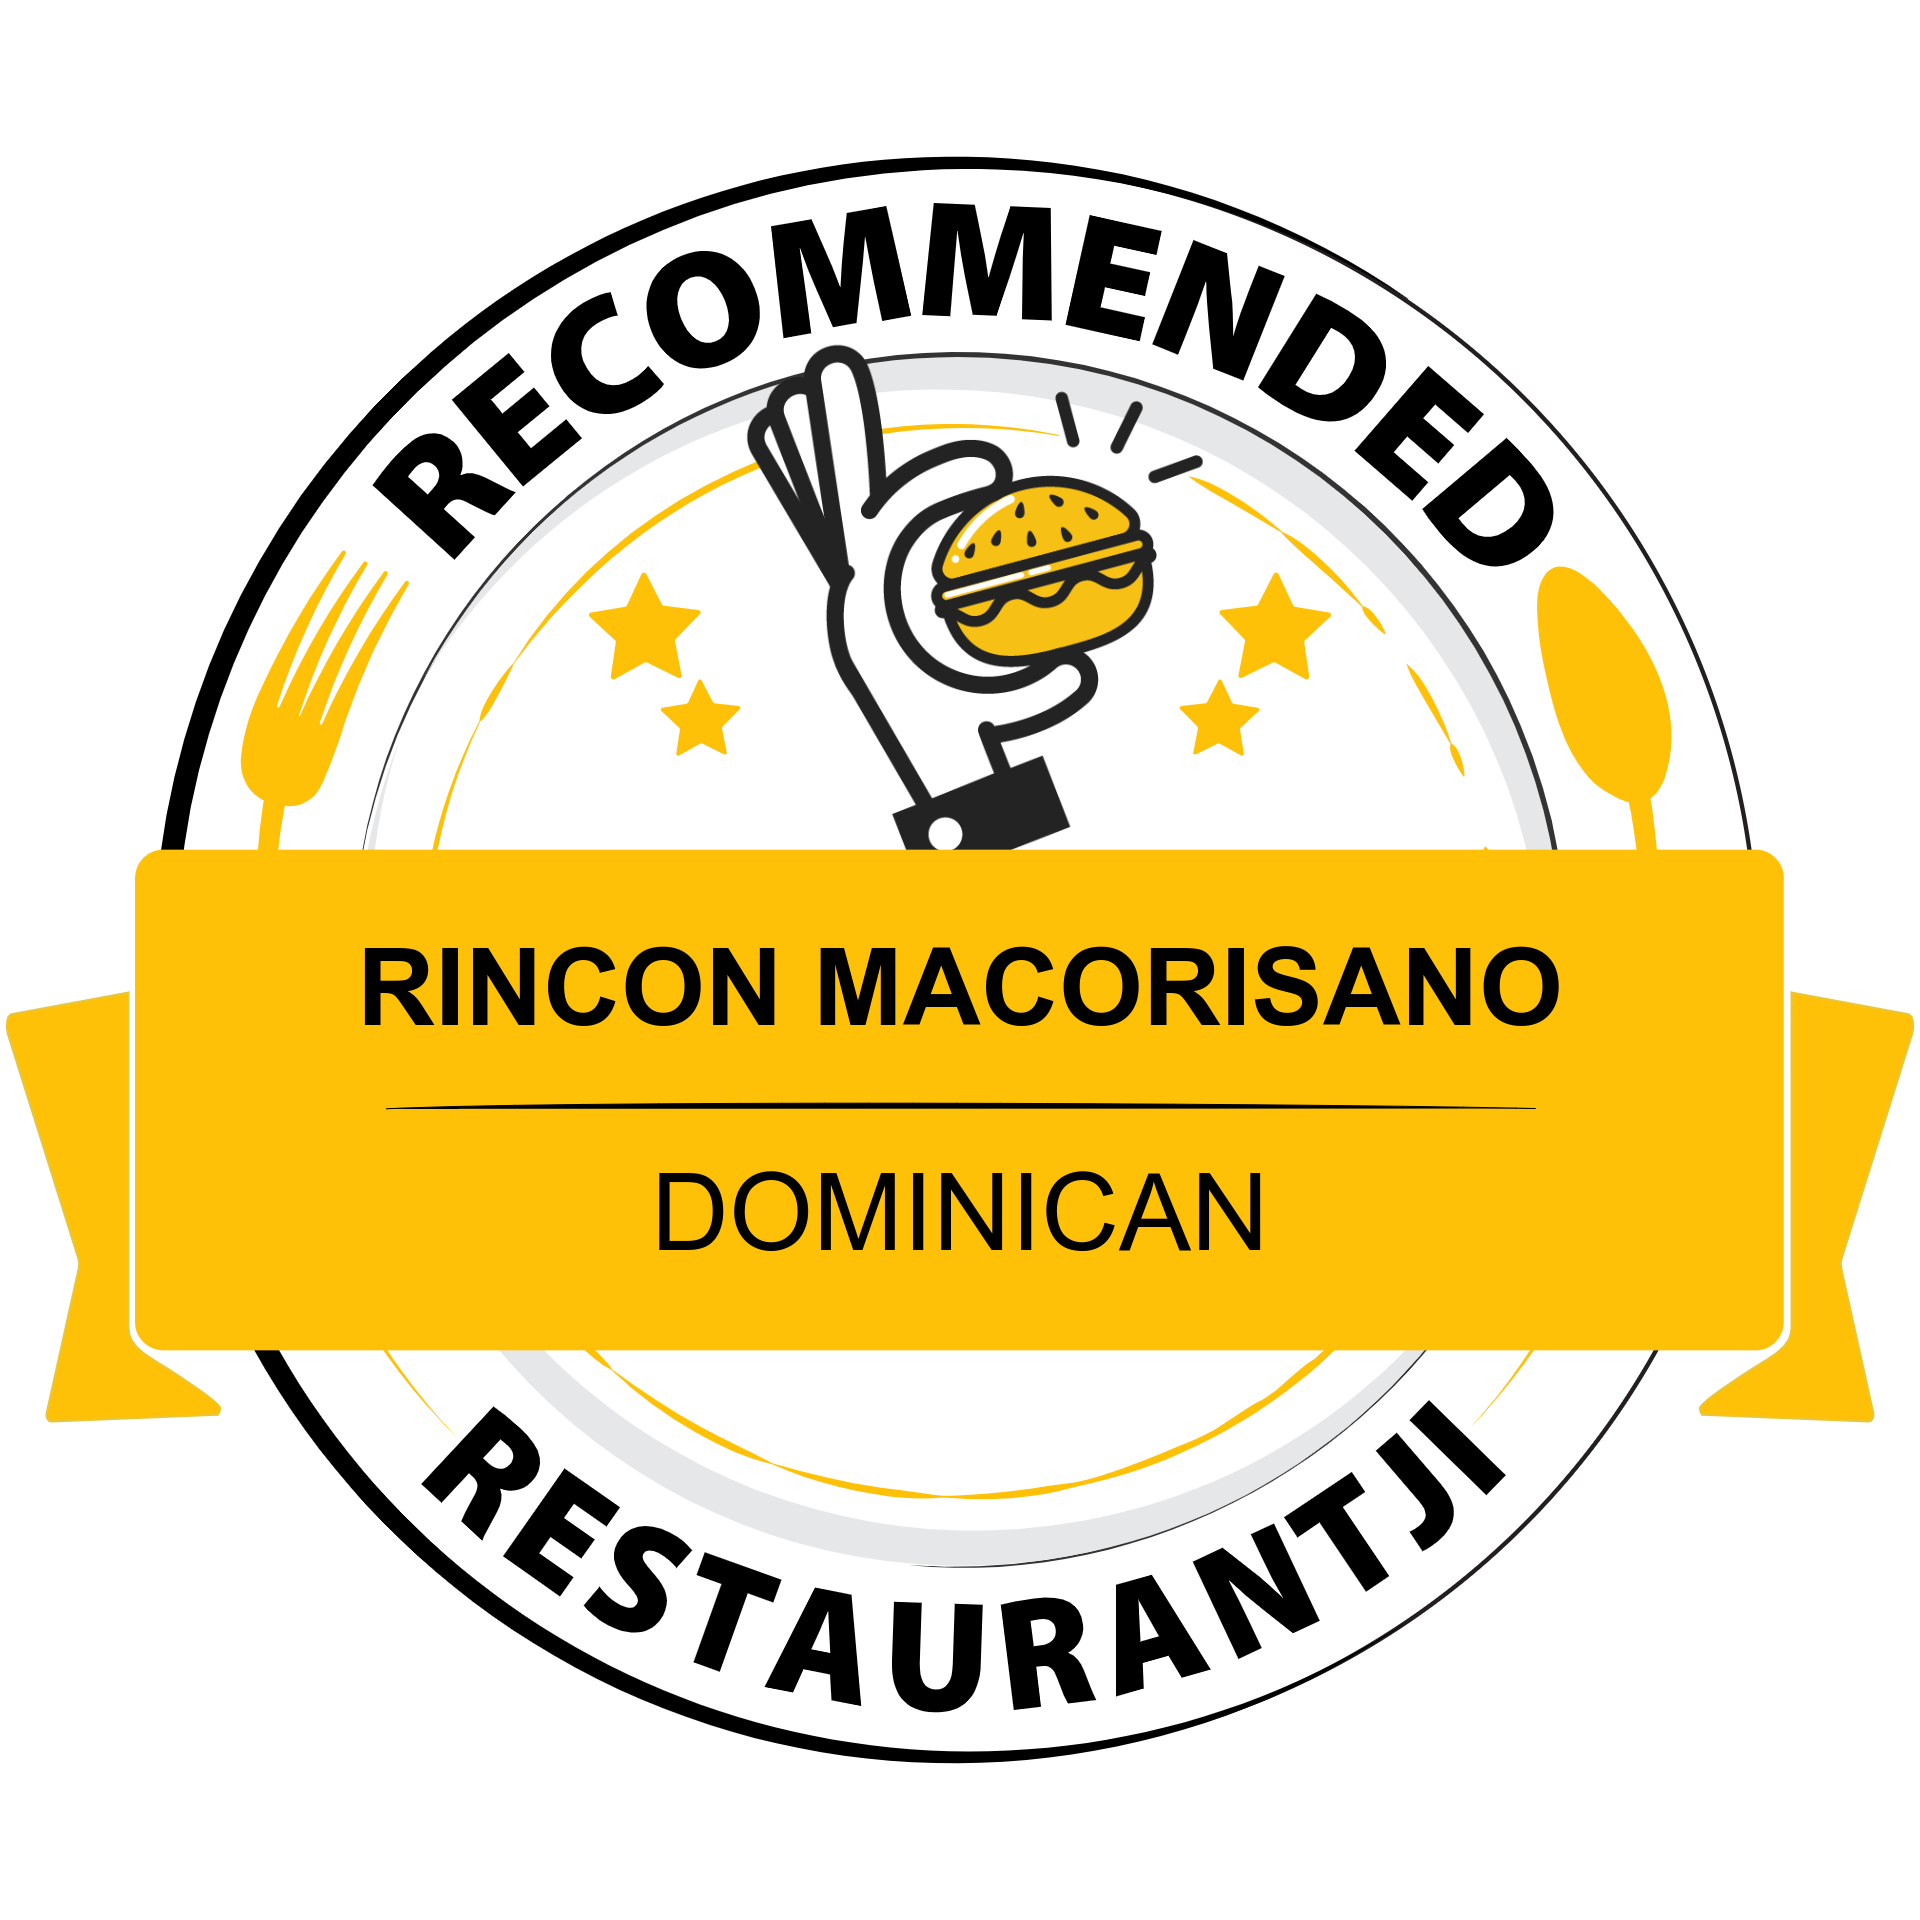 Rincon Macorisano is a go-to spot on Restaurantji - your local guide to nearby restaurants.